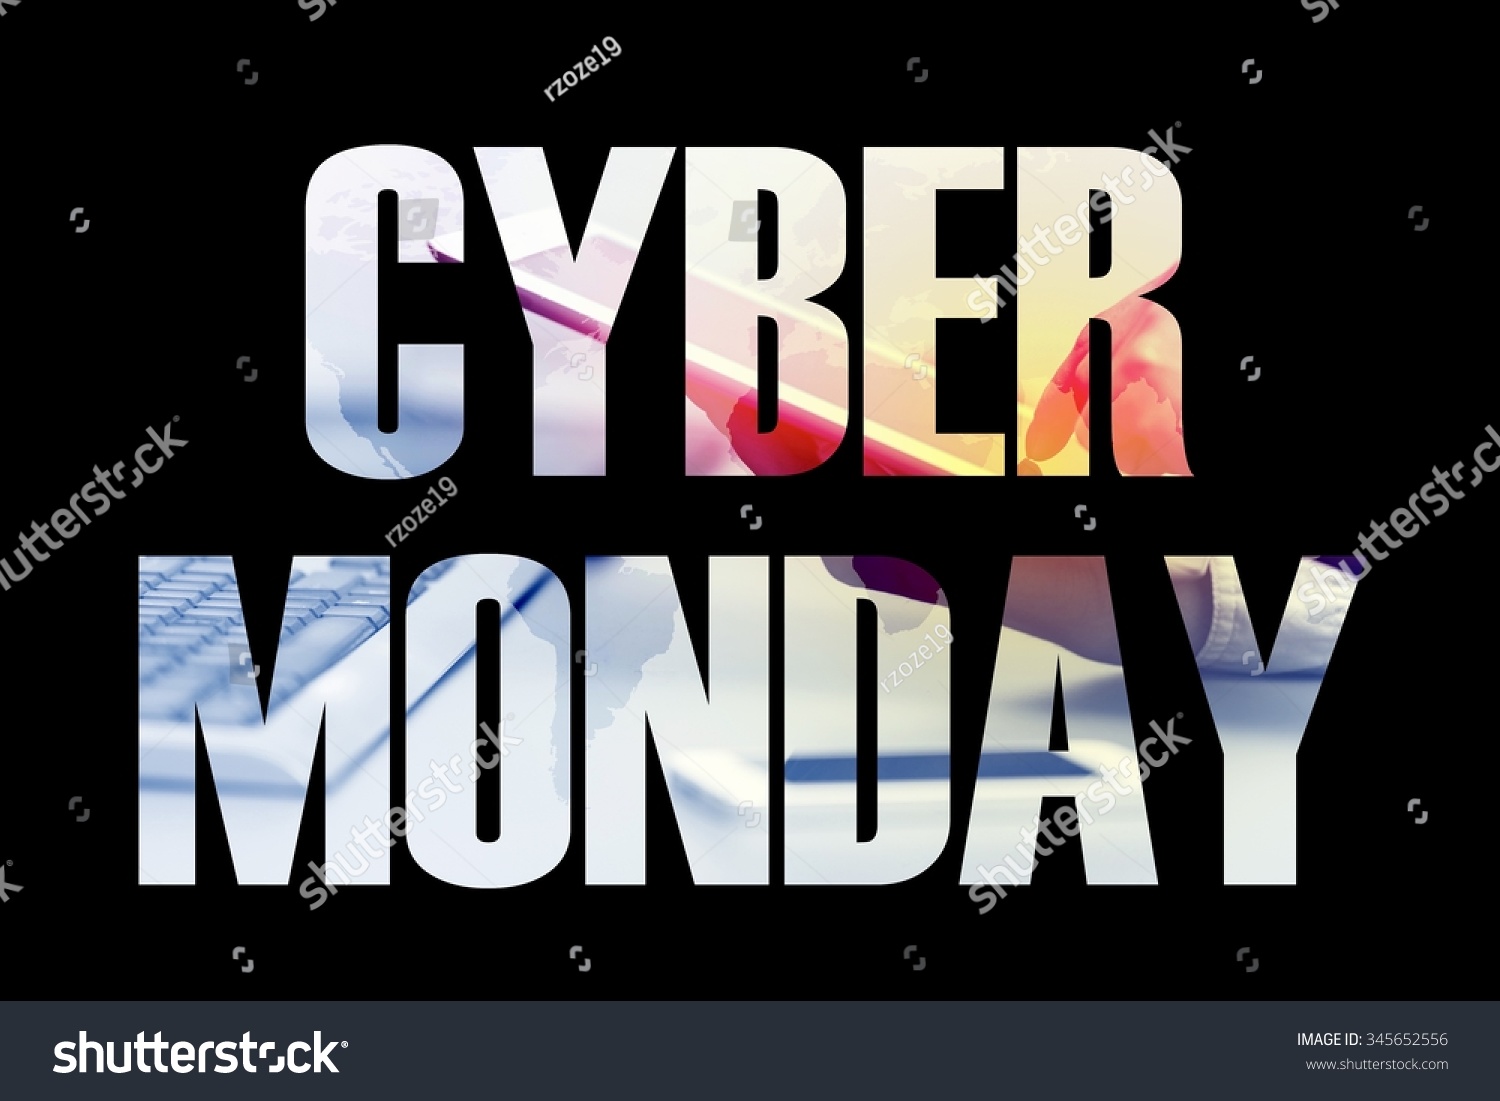 Cyber Monday Lettering On Black Background Stock Photo (Edit Now